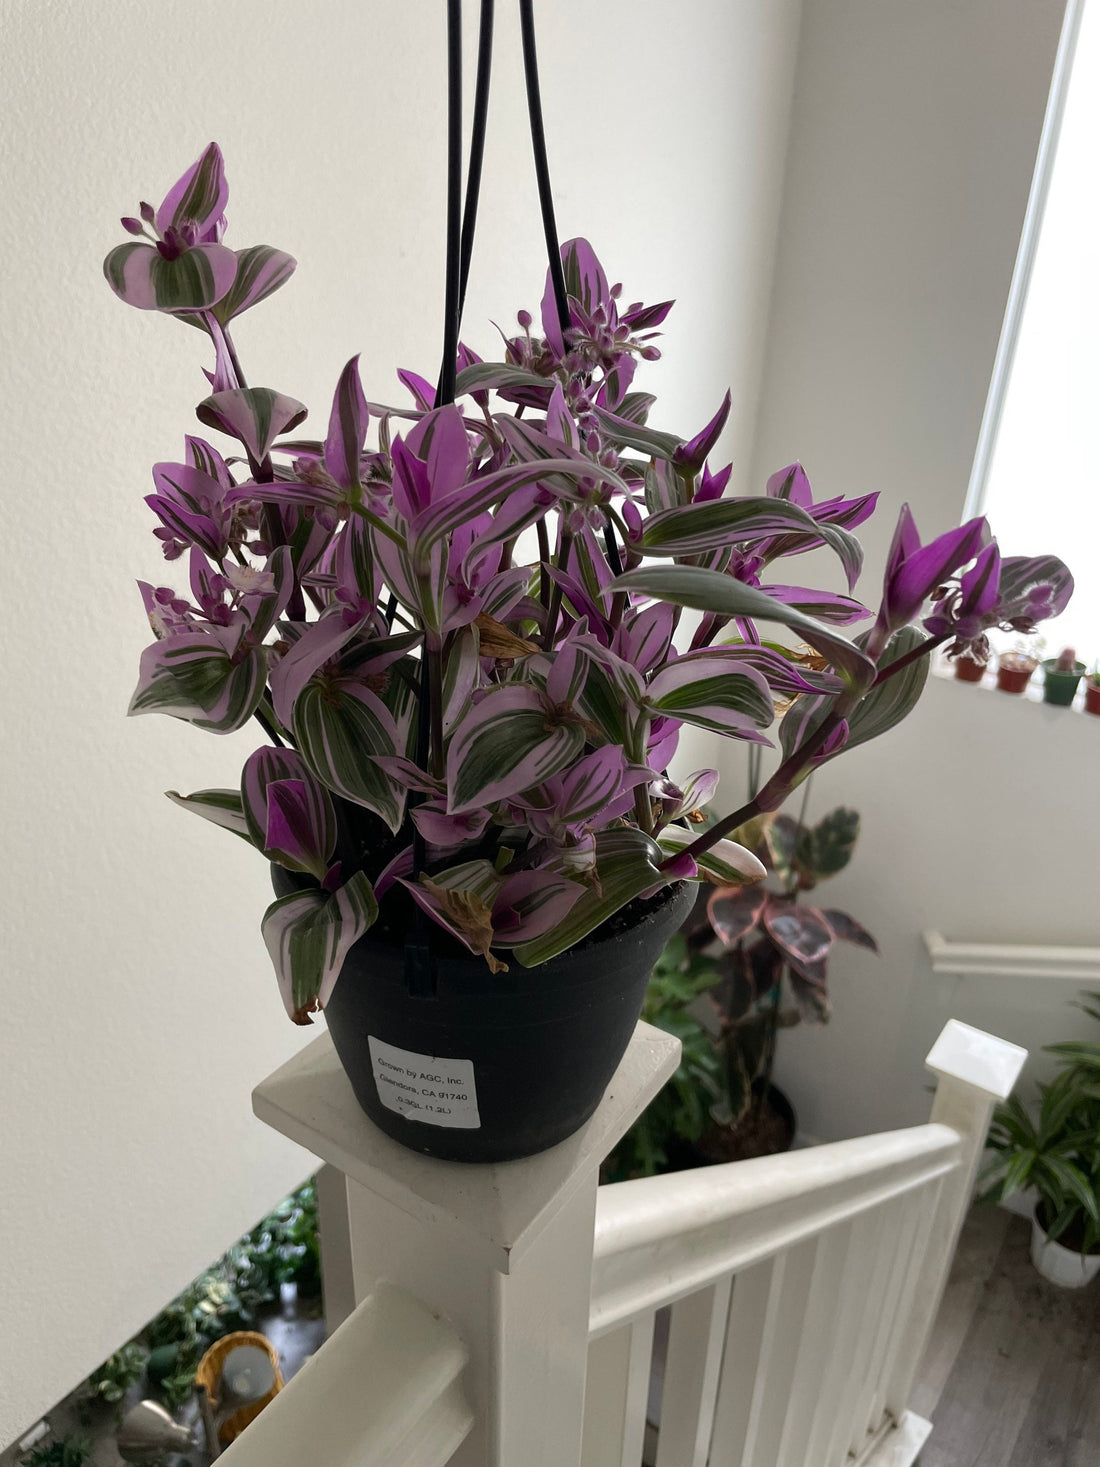 Xtra Large 6 inch pot live plant -Tradescantia Nanouk| Rare Lavender Succulent-Like -Hard to Find this size